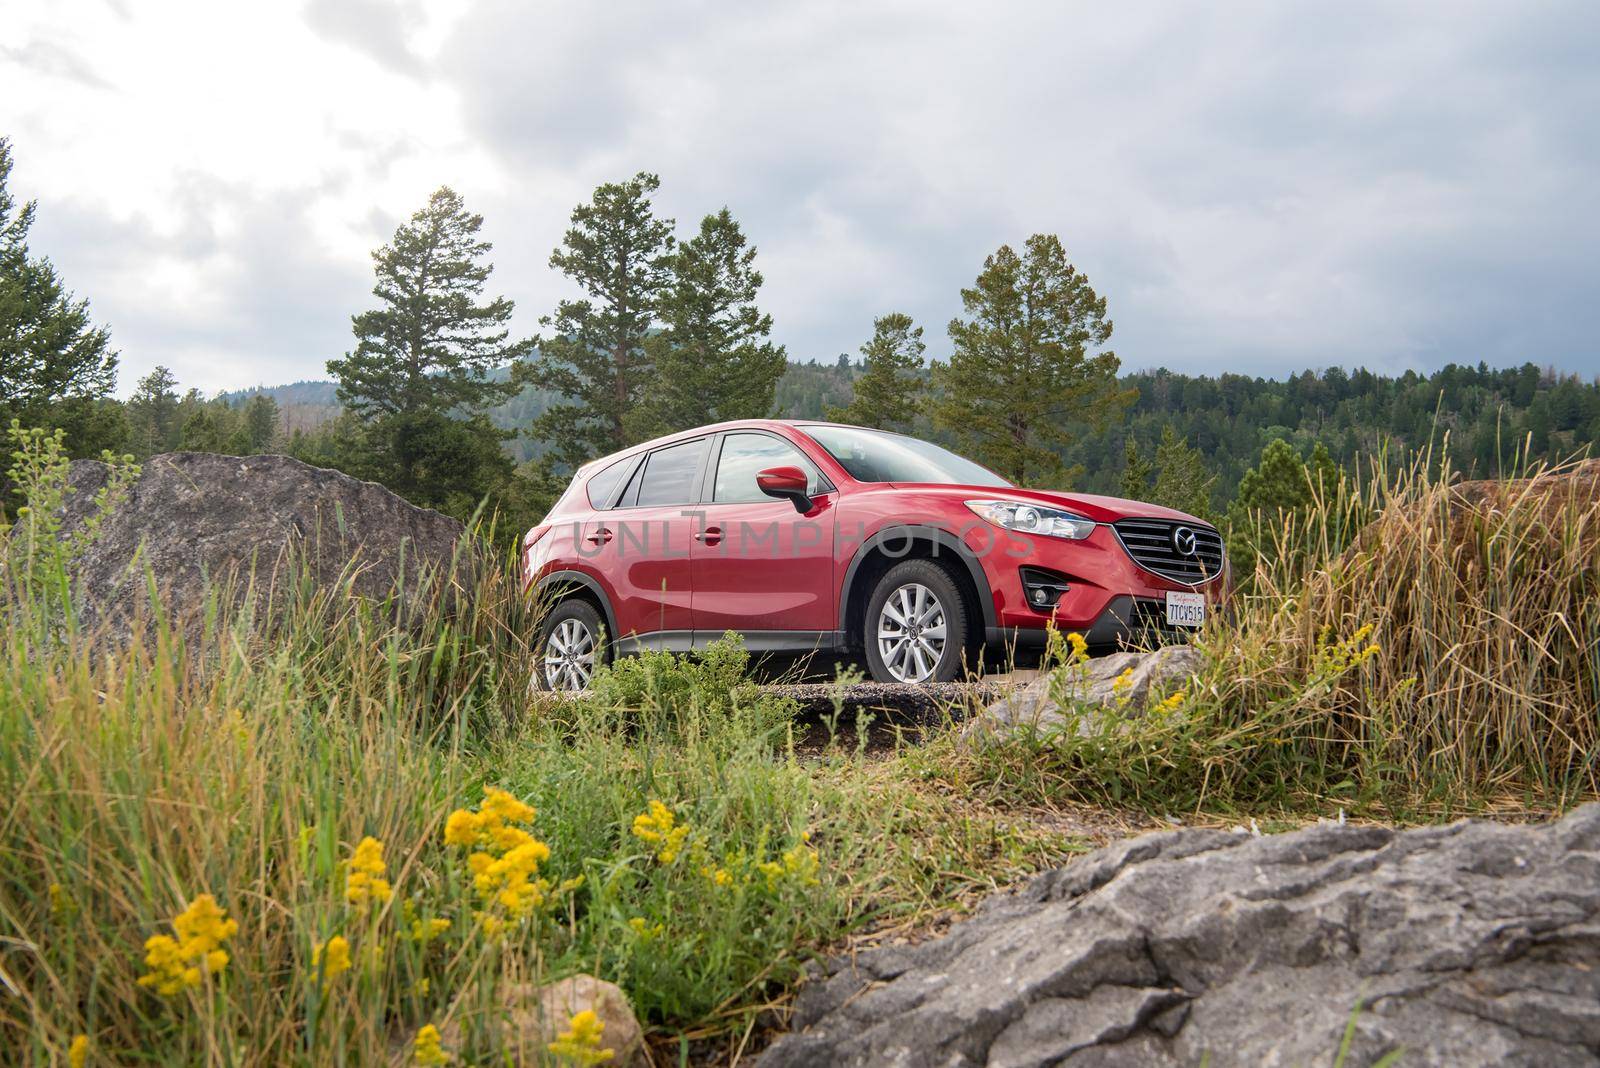 Beauty photo of red SUV on a road trip with flowers and trees surrounding it.